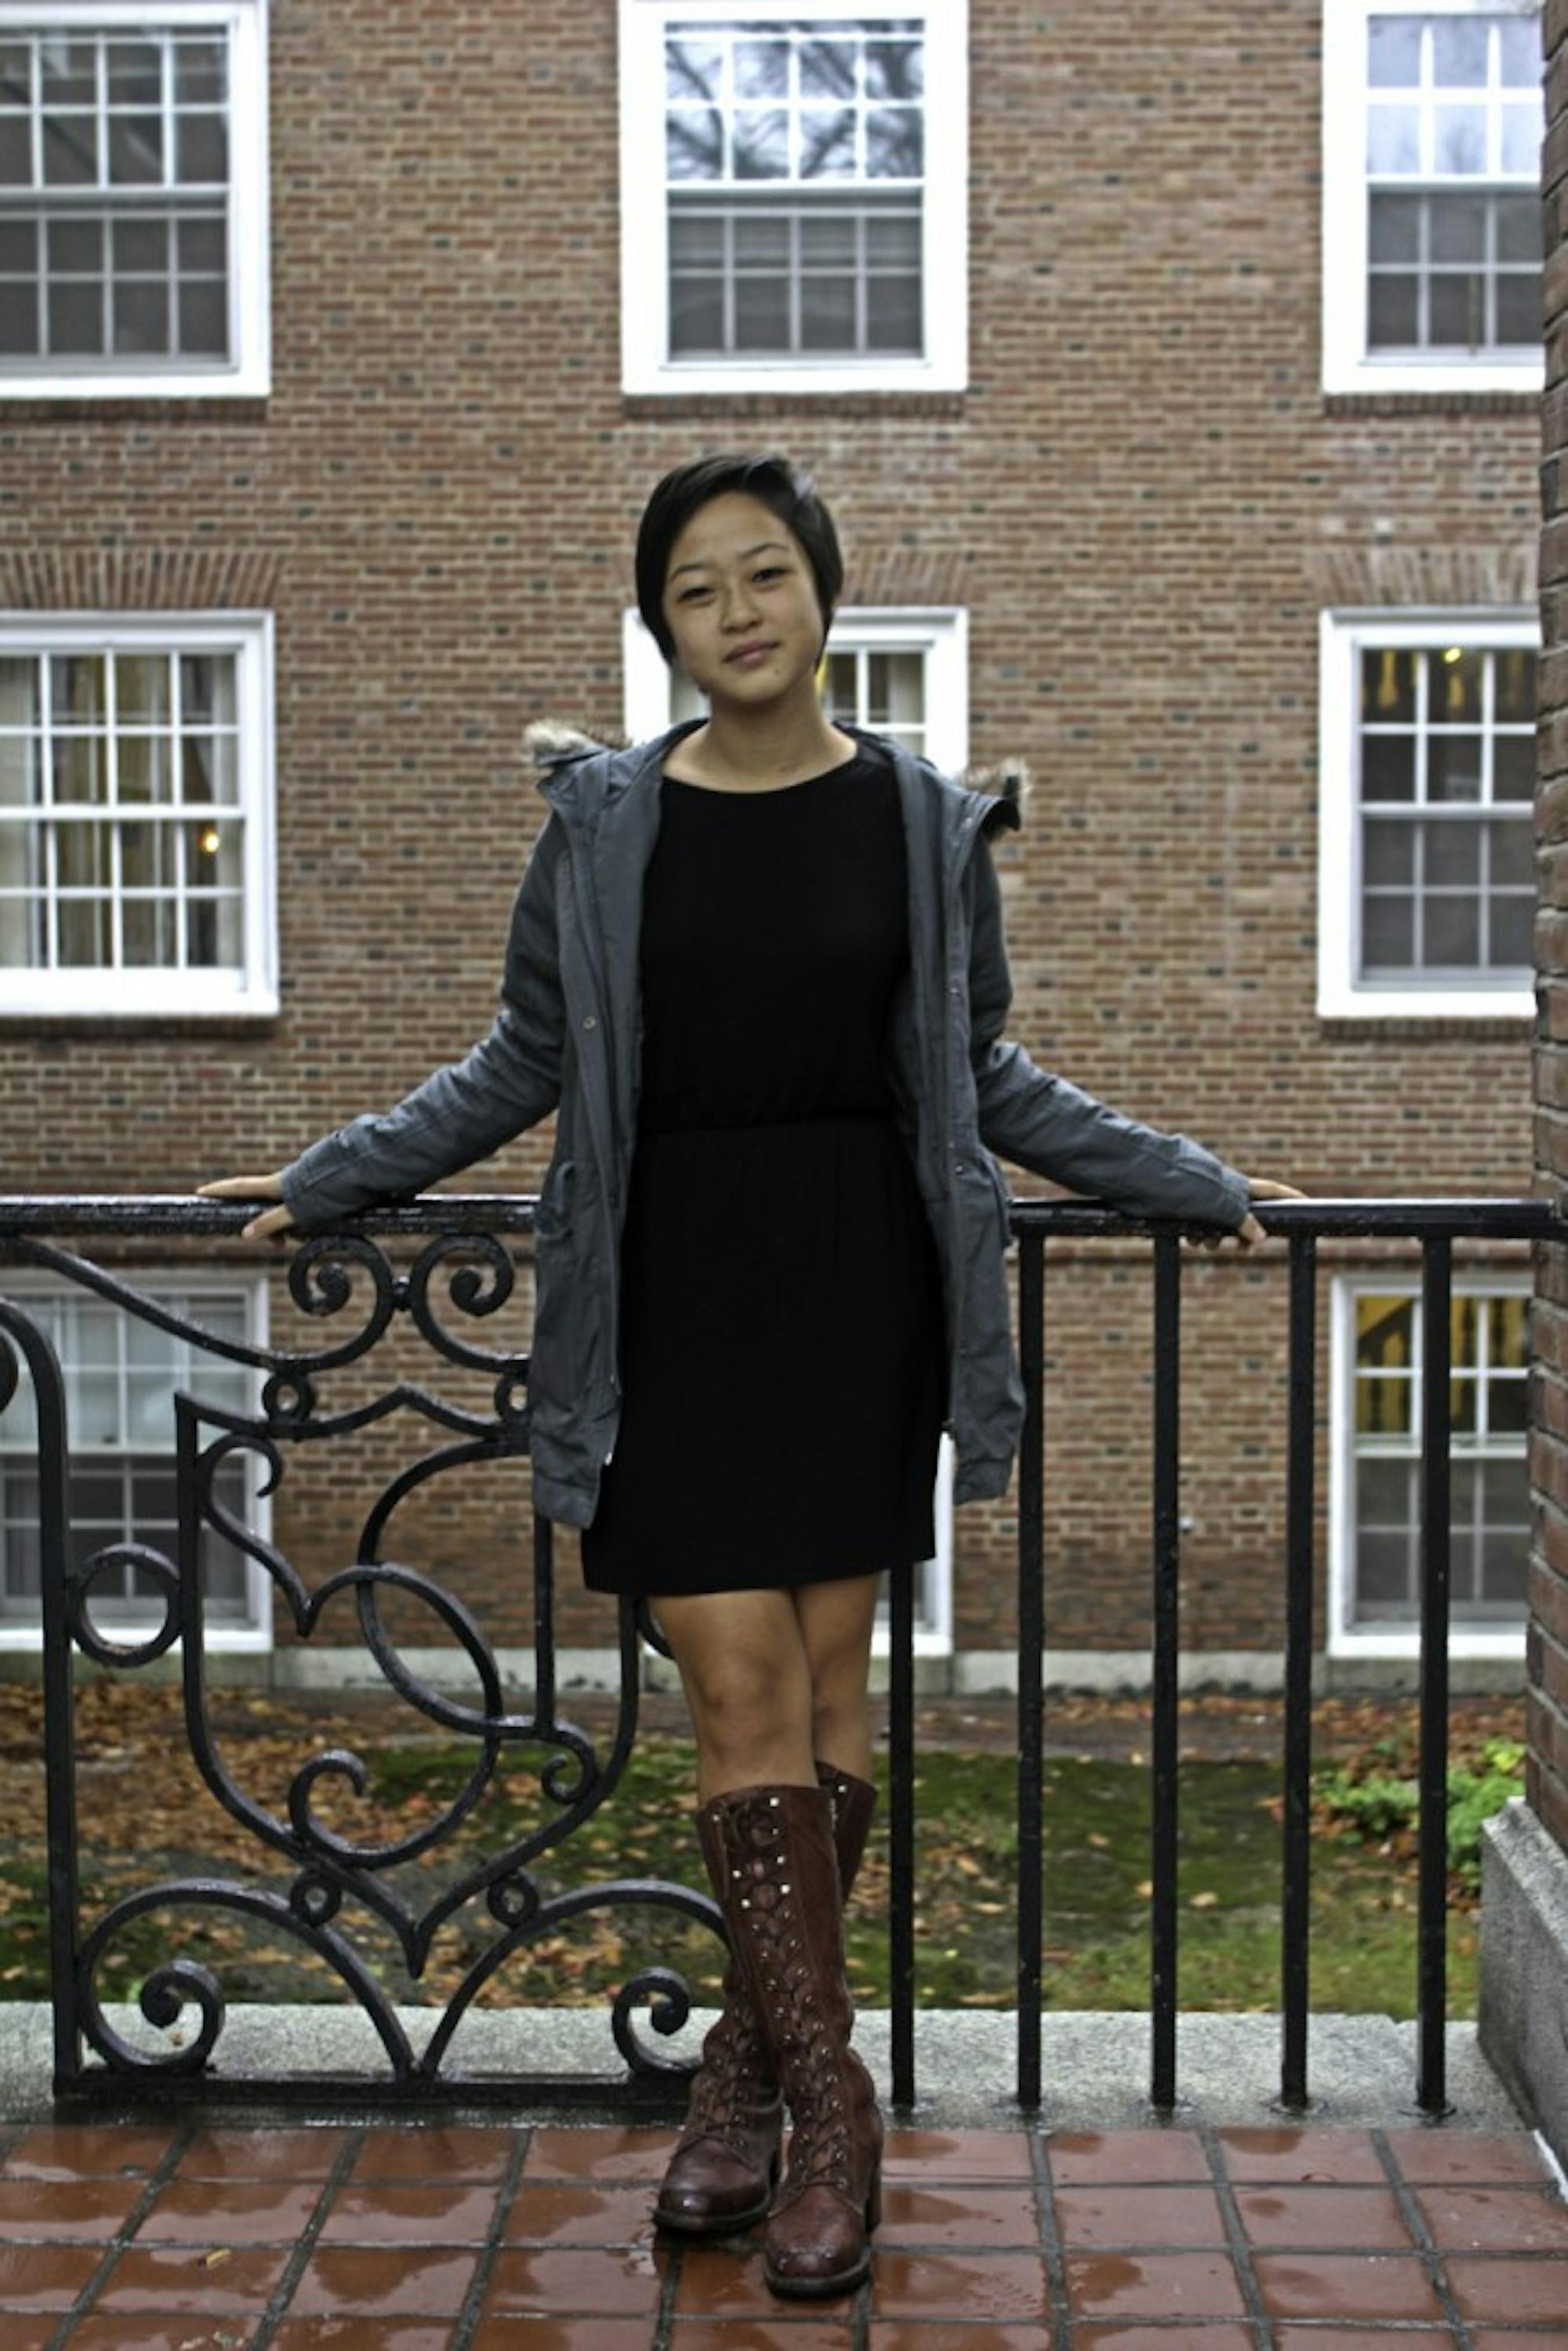 After moving all her possessions for the 10th time at Dartmouth, Connie Gong ’15 reflects on her minimalist attitude and the things that really matter.